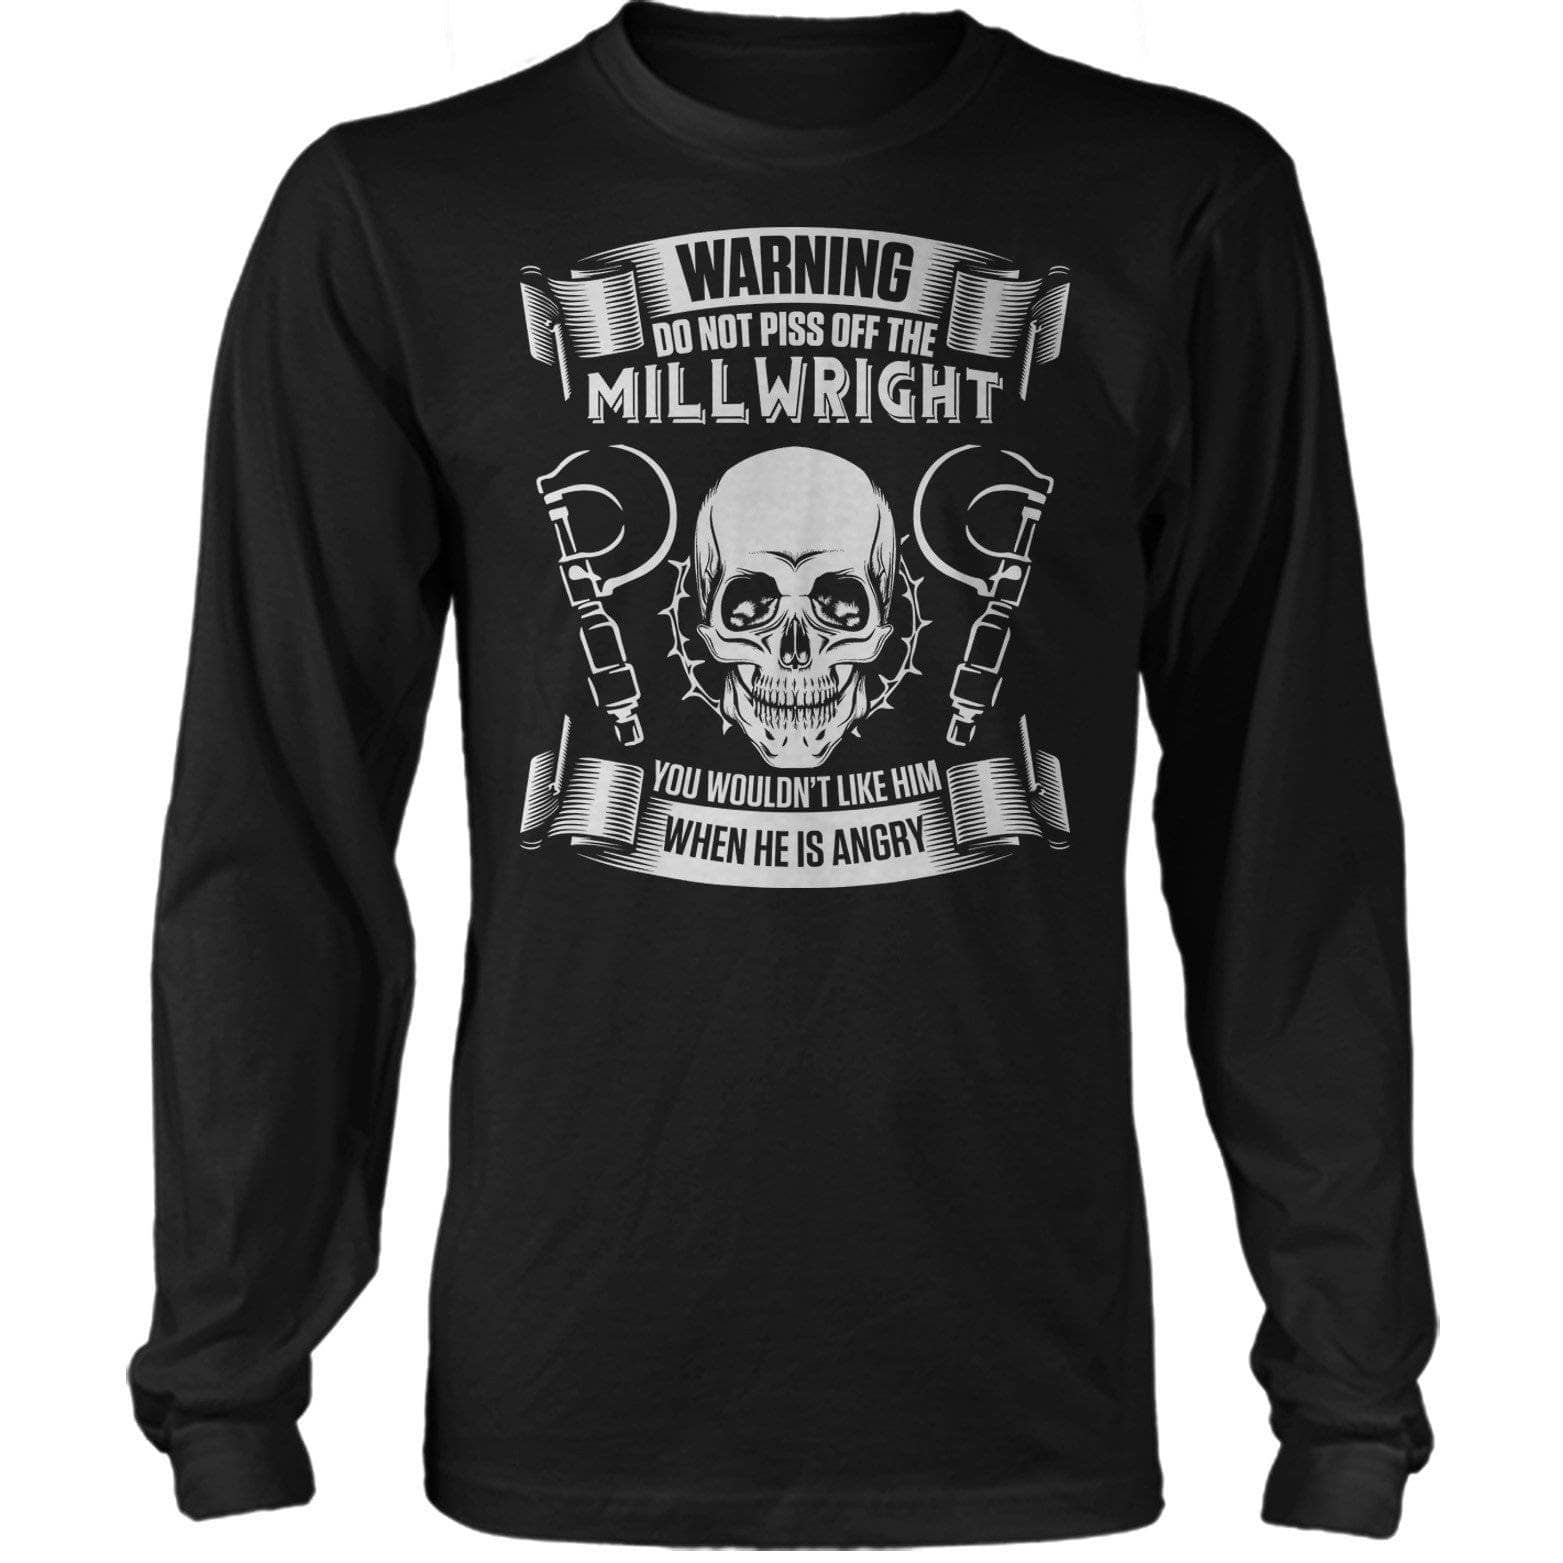 Don't Piss Off Millwright Long Sleeve Tee